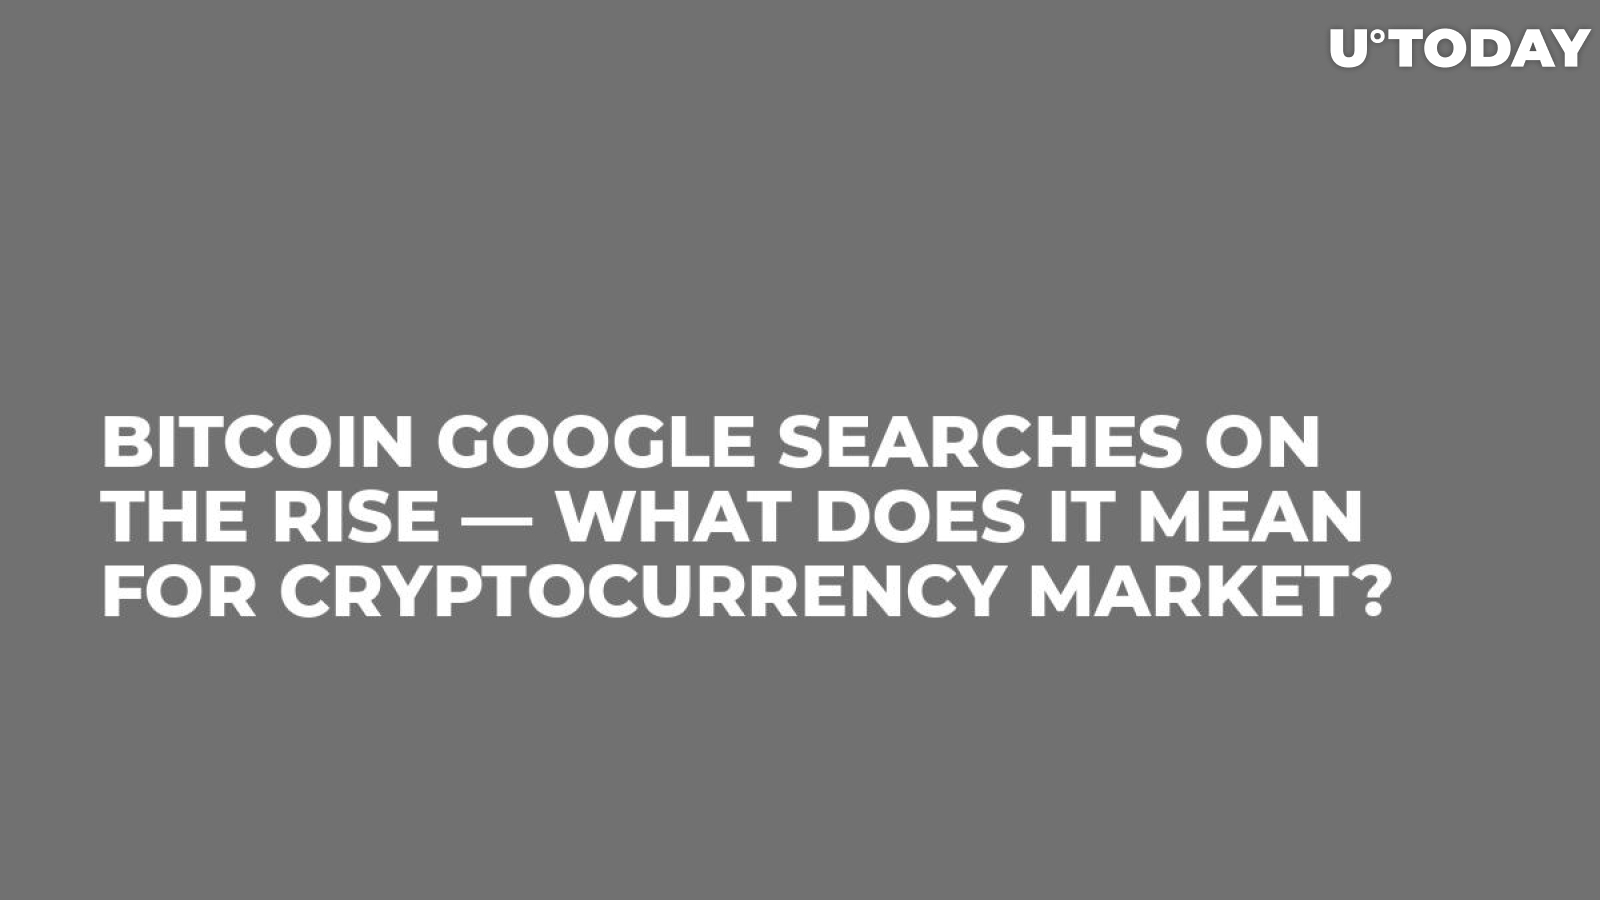 Bitcoin Google Searches on the Rise — What Does it Mean for Cryptocurrency Market?